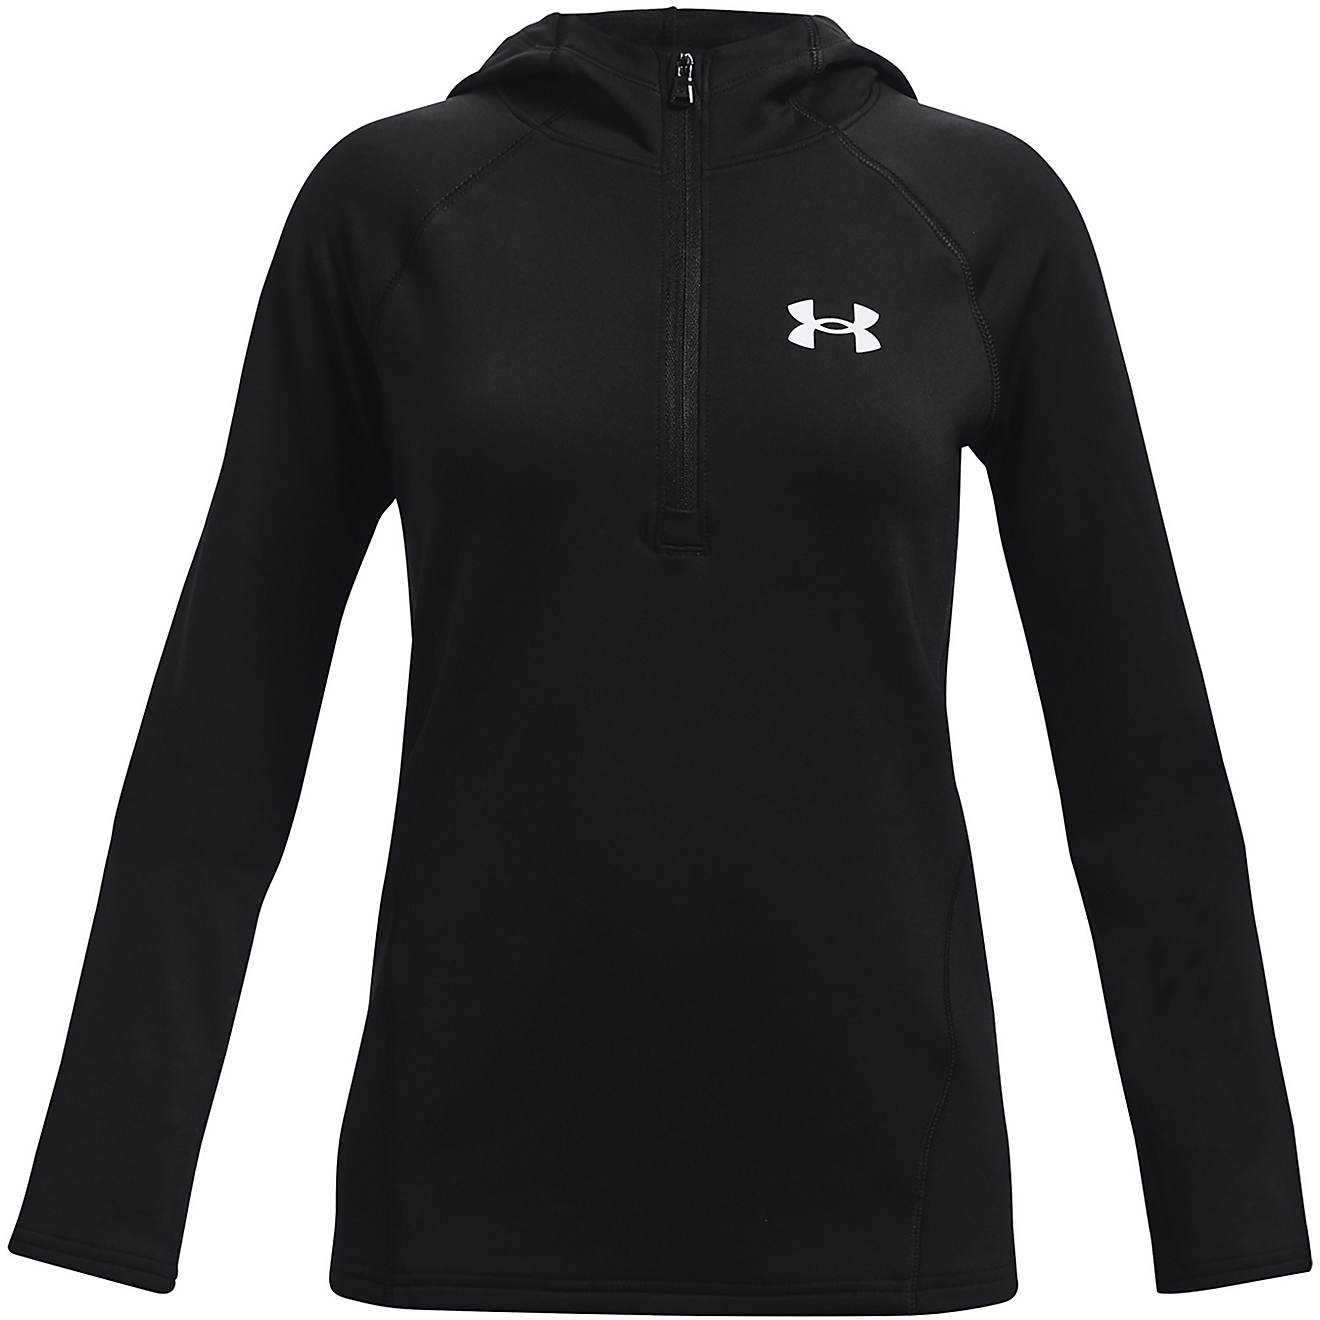 NWT UNDER ARMOUR ColdGear Girls Fleece Lined Pullover Hoodie Gray SELECT SIZE 